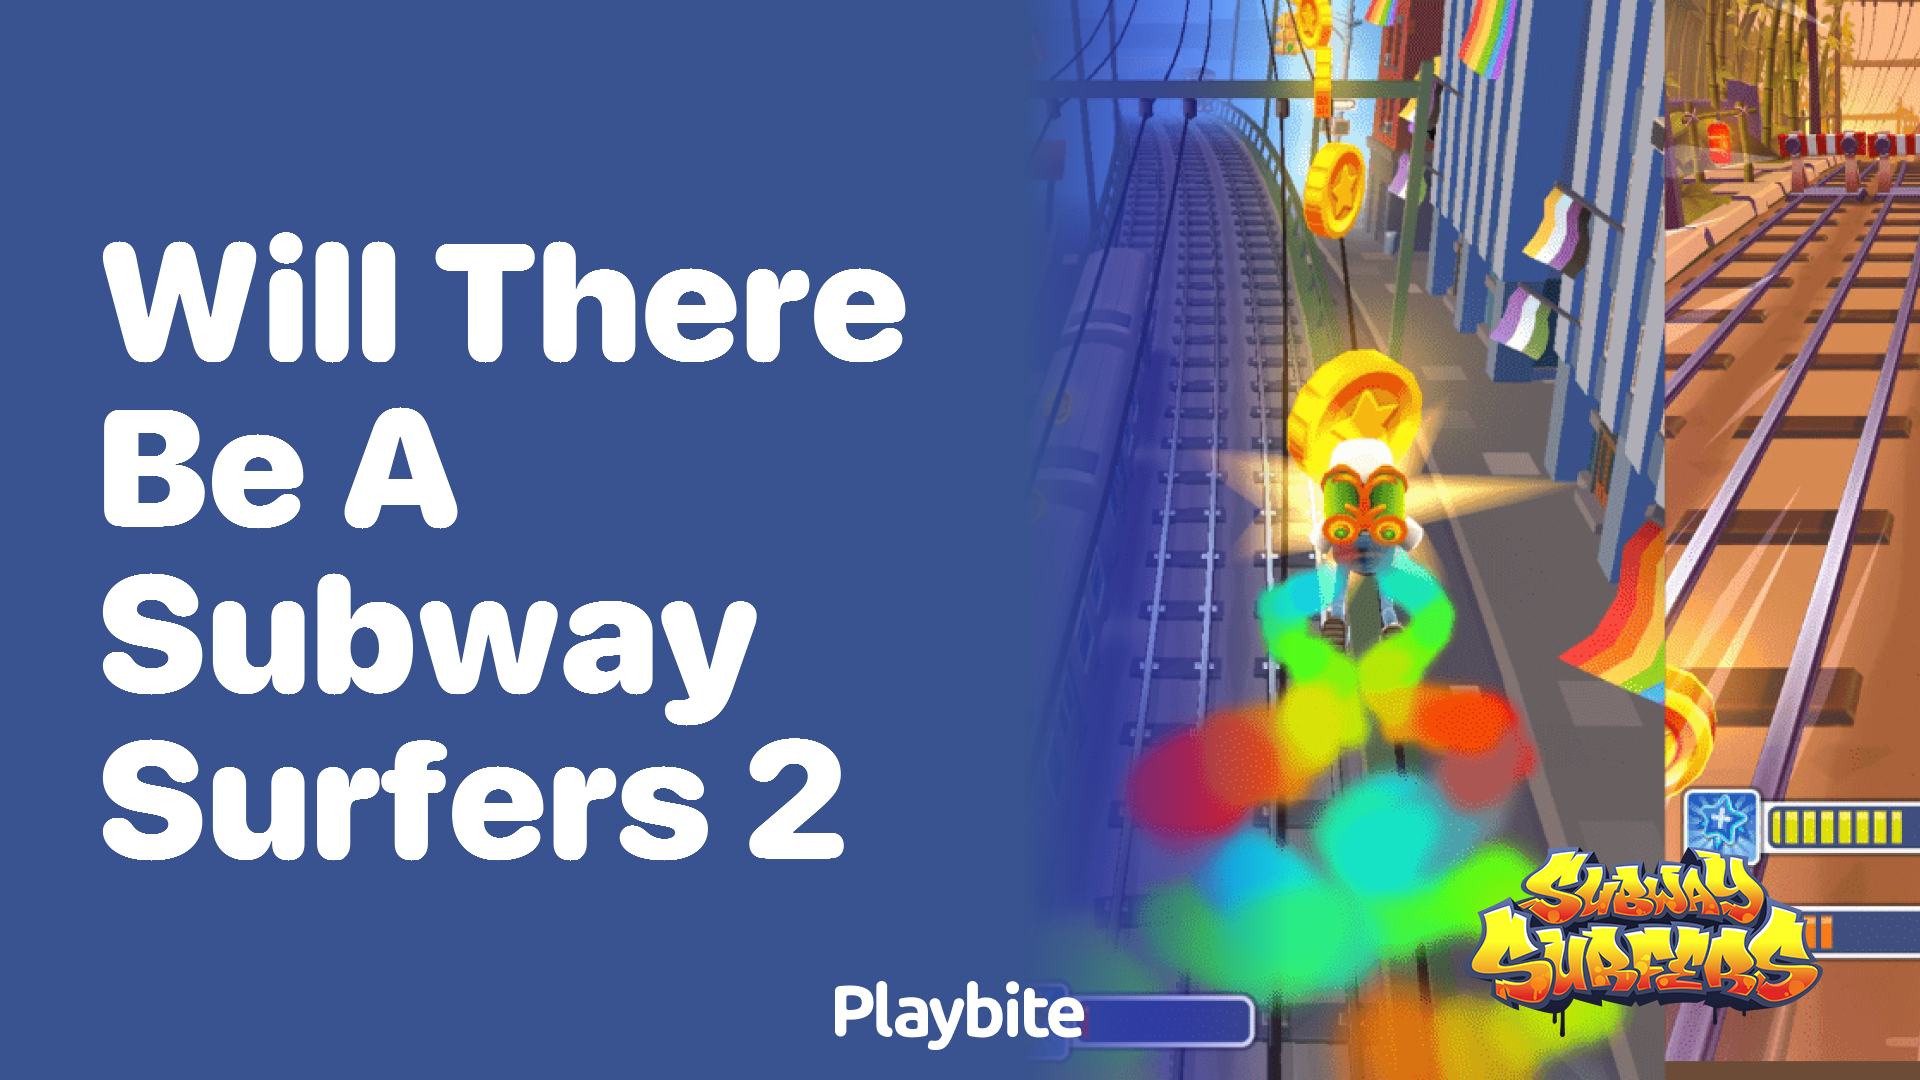 Will there be a Subway Surfers 2?